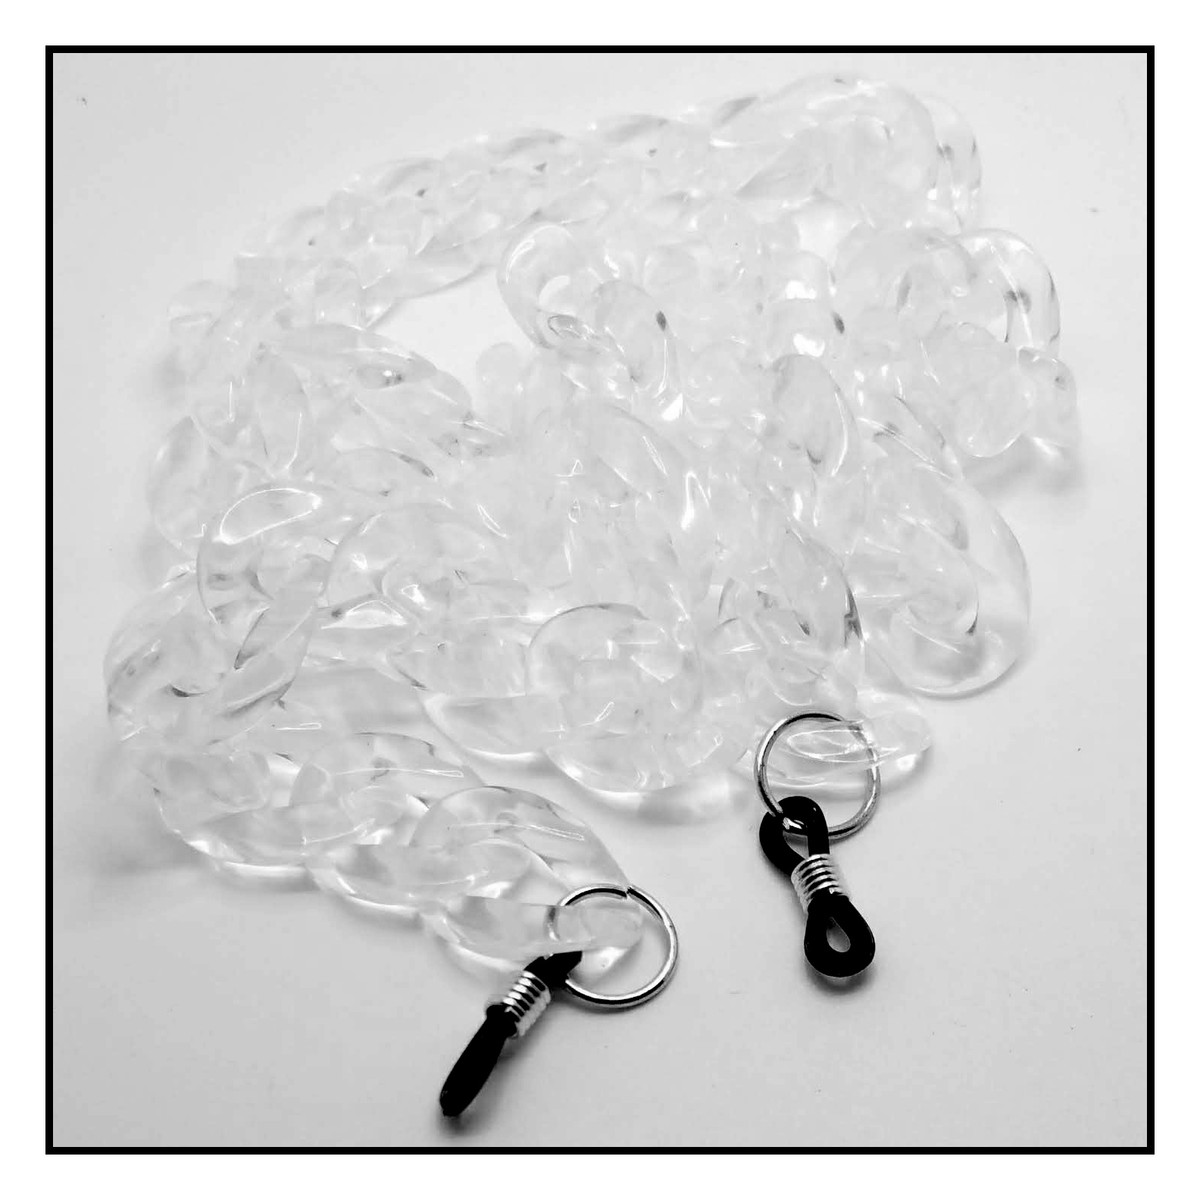 Jelly Chain Brown Clear Chain Links Plastic Chain for Glasses 